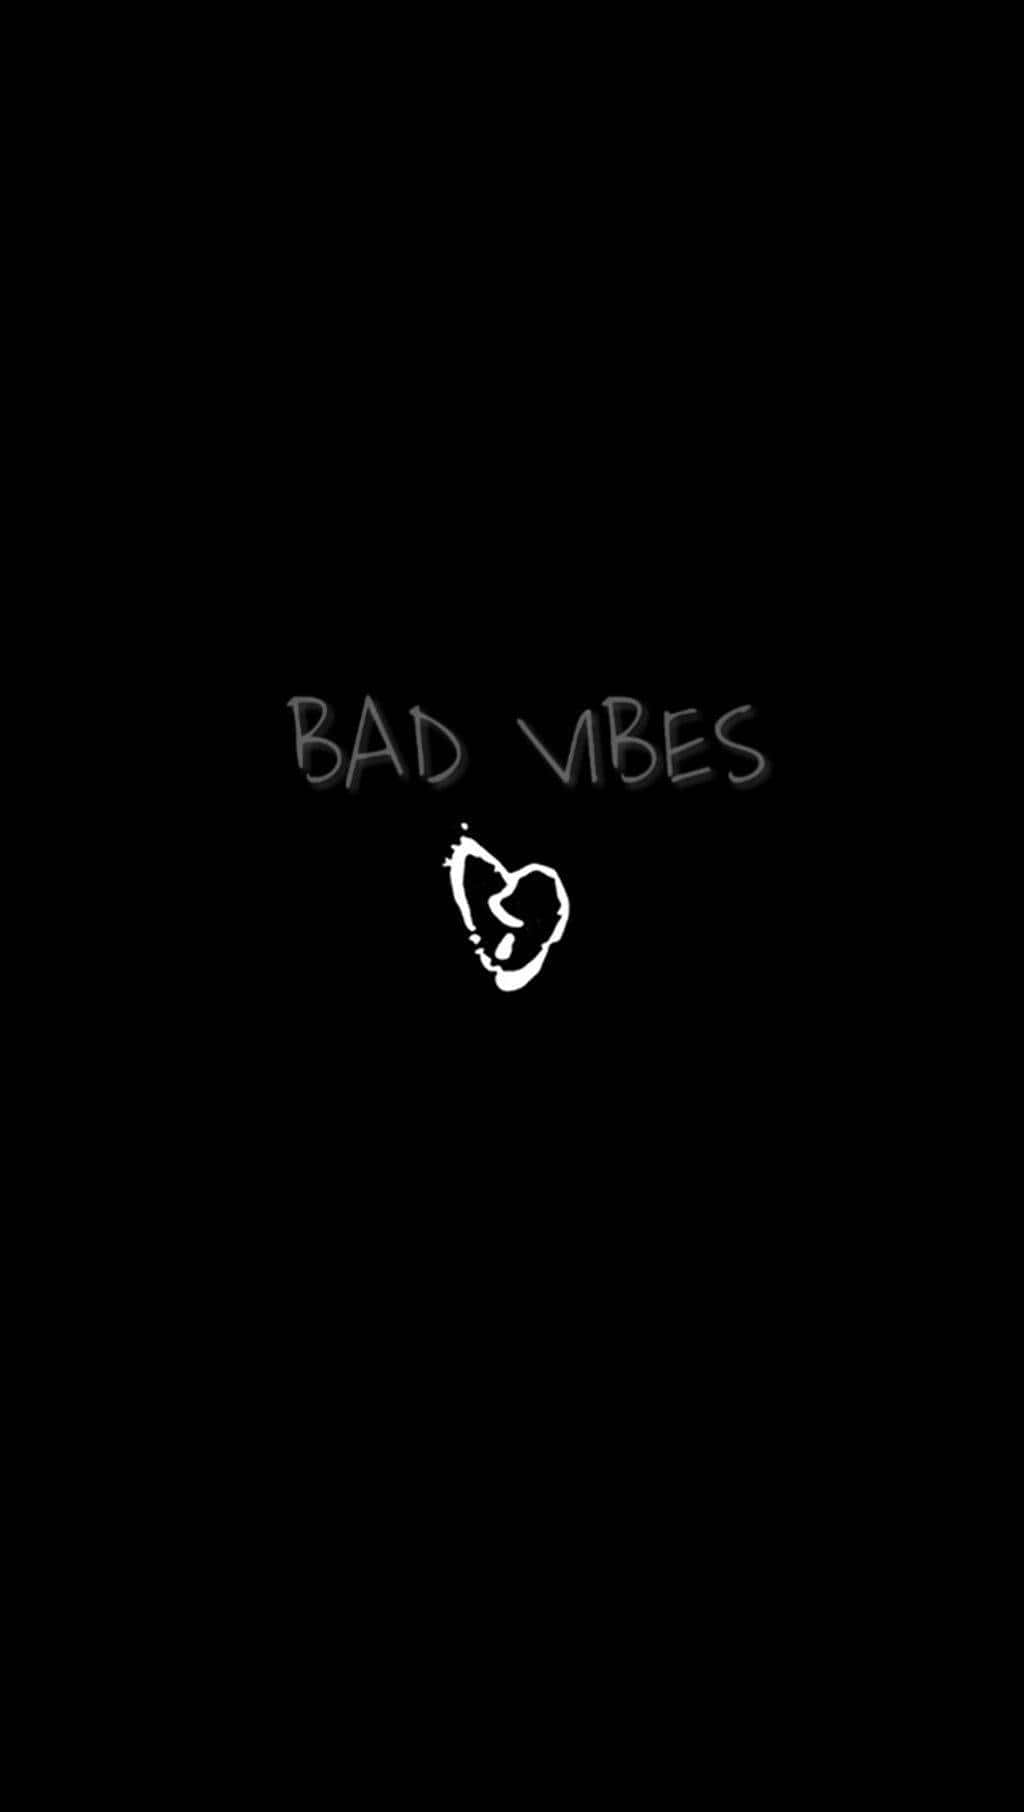 "This vibes are fading fast" Wallpaper